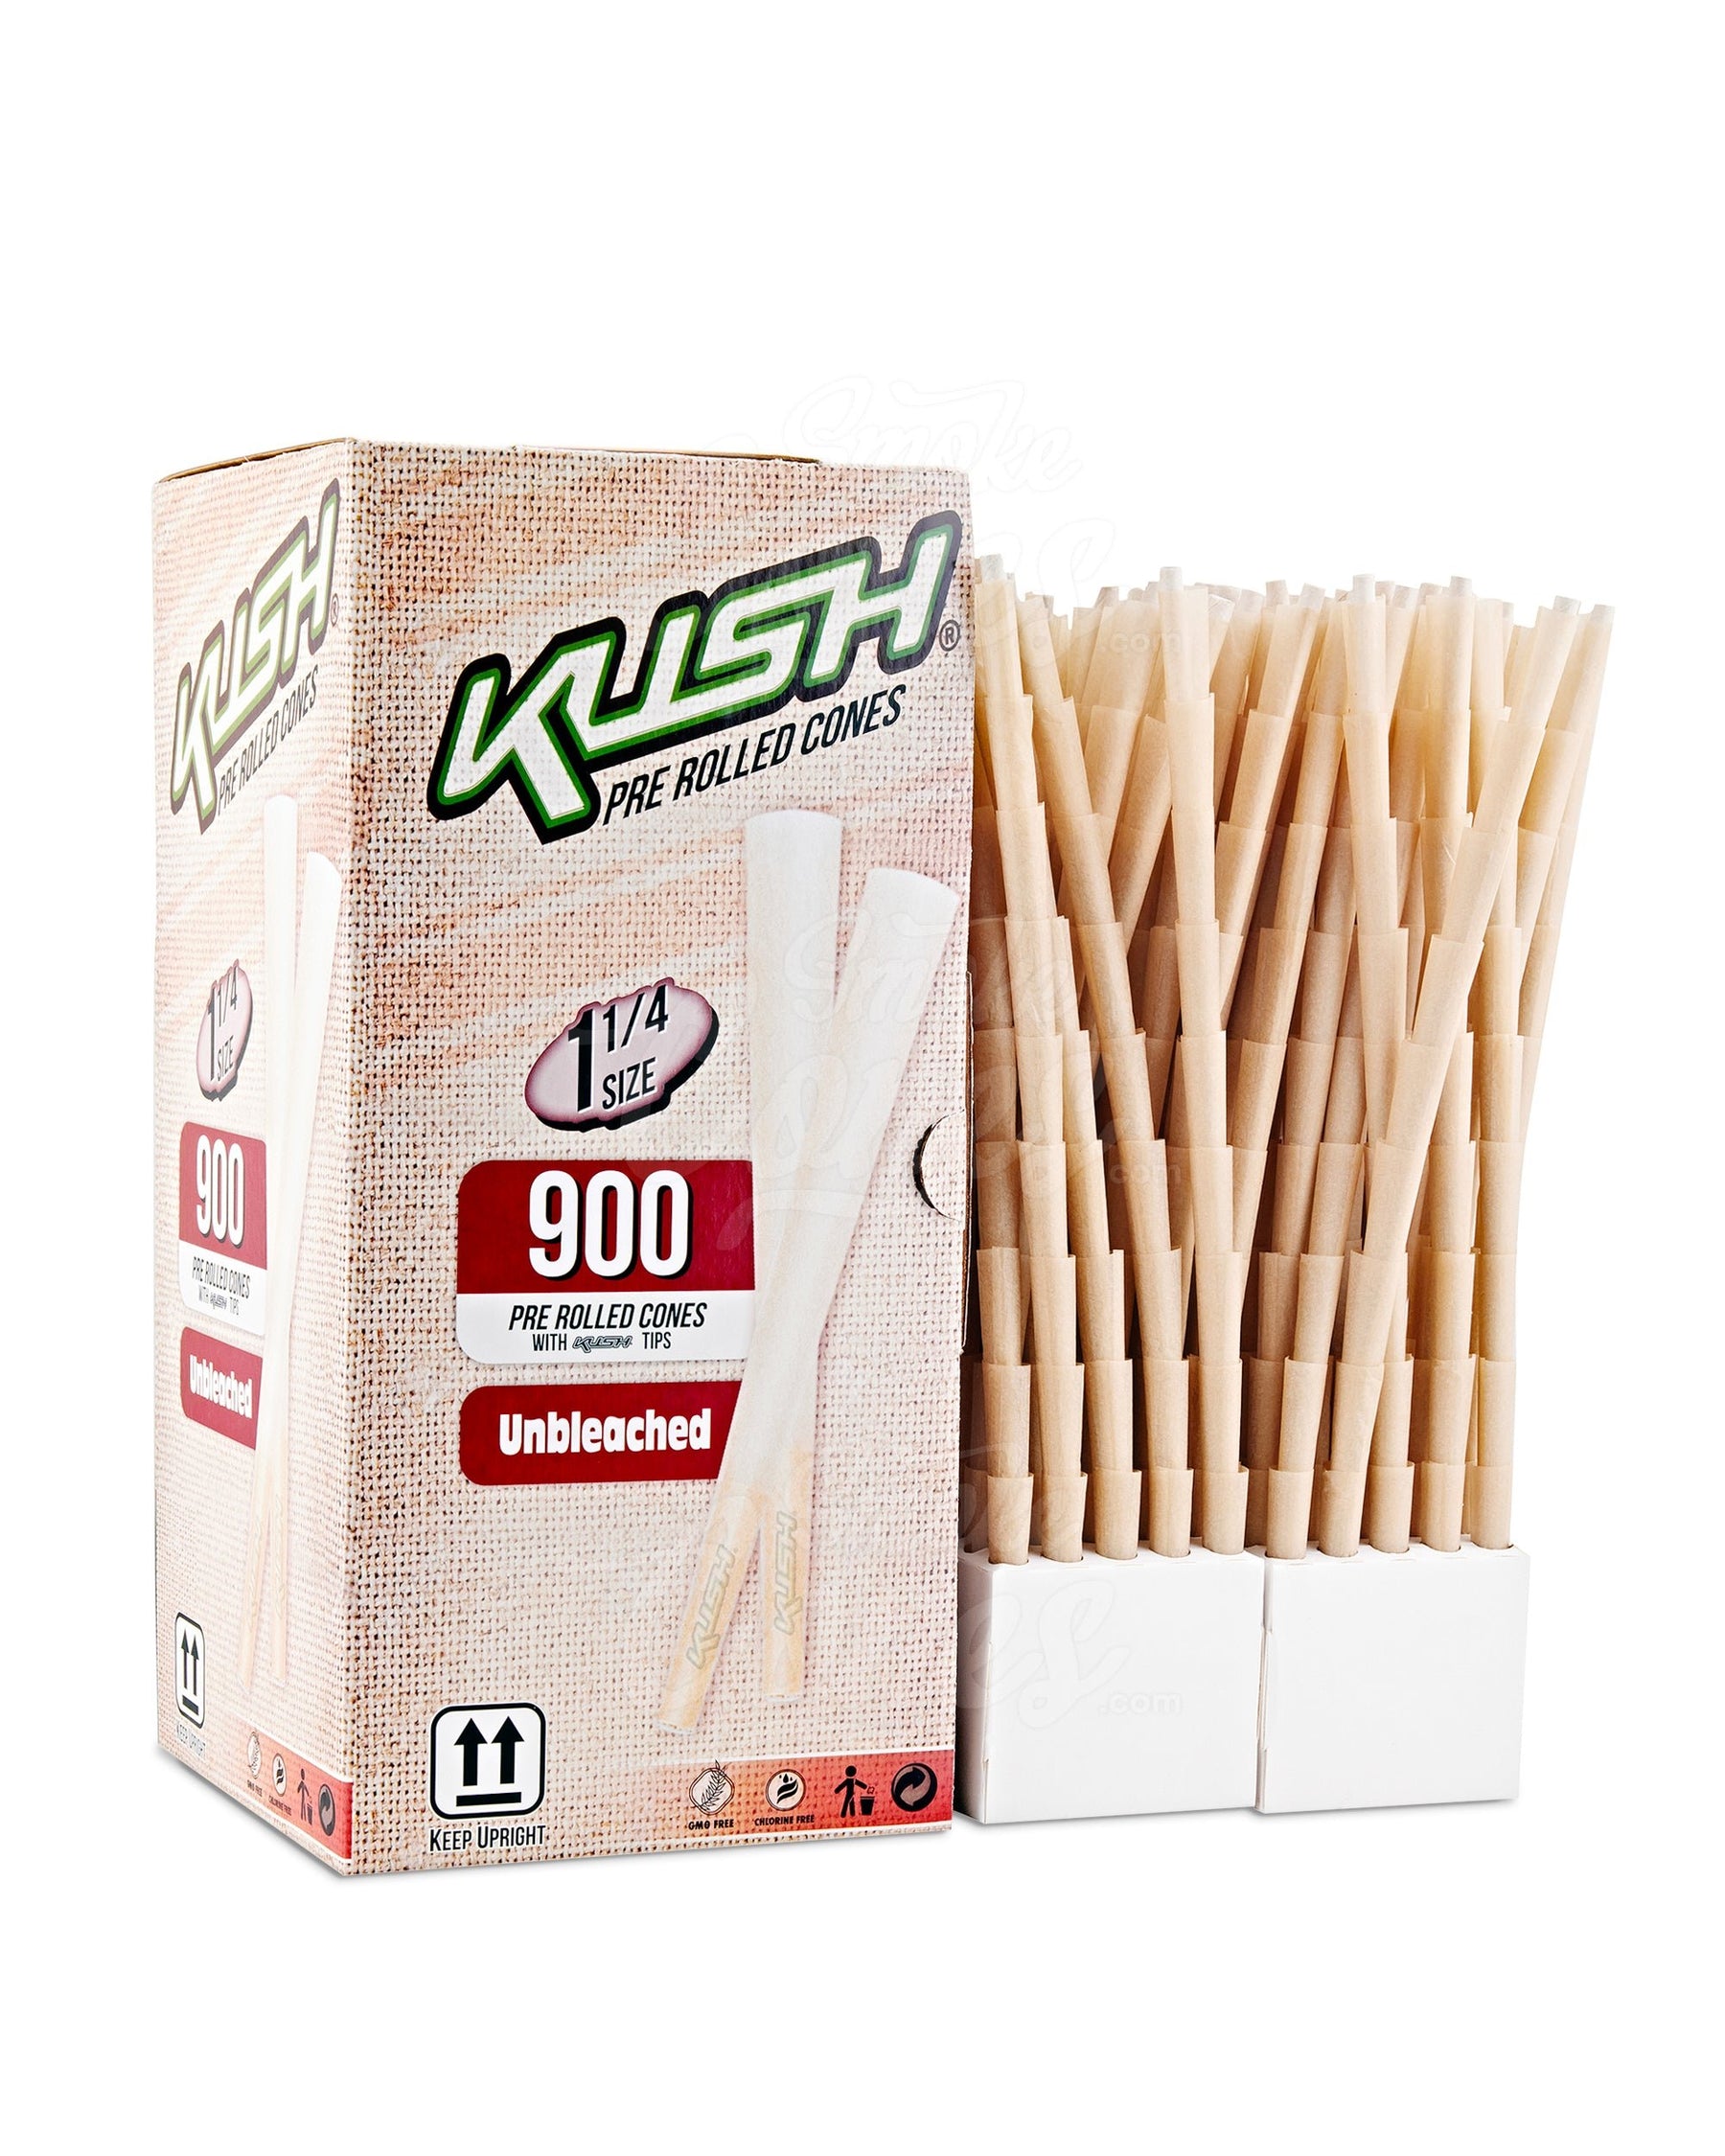 Kush 84mm 1 1/4 Size Unbleached Pre Rolled Cones w/ Filter Tip 900/Box - 2